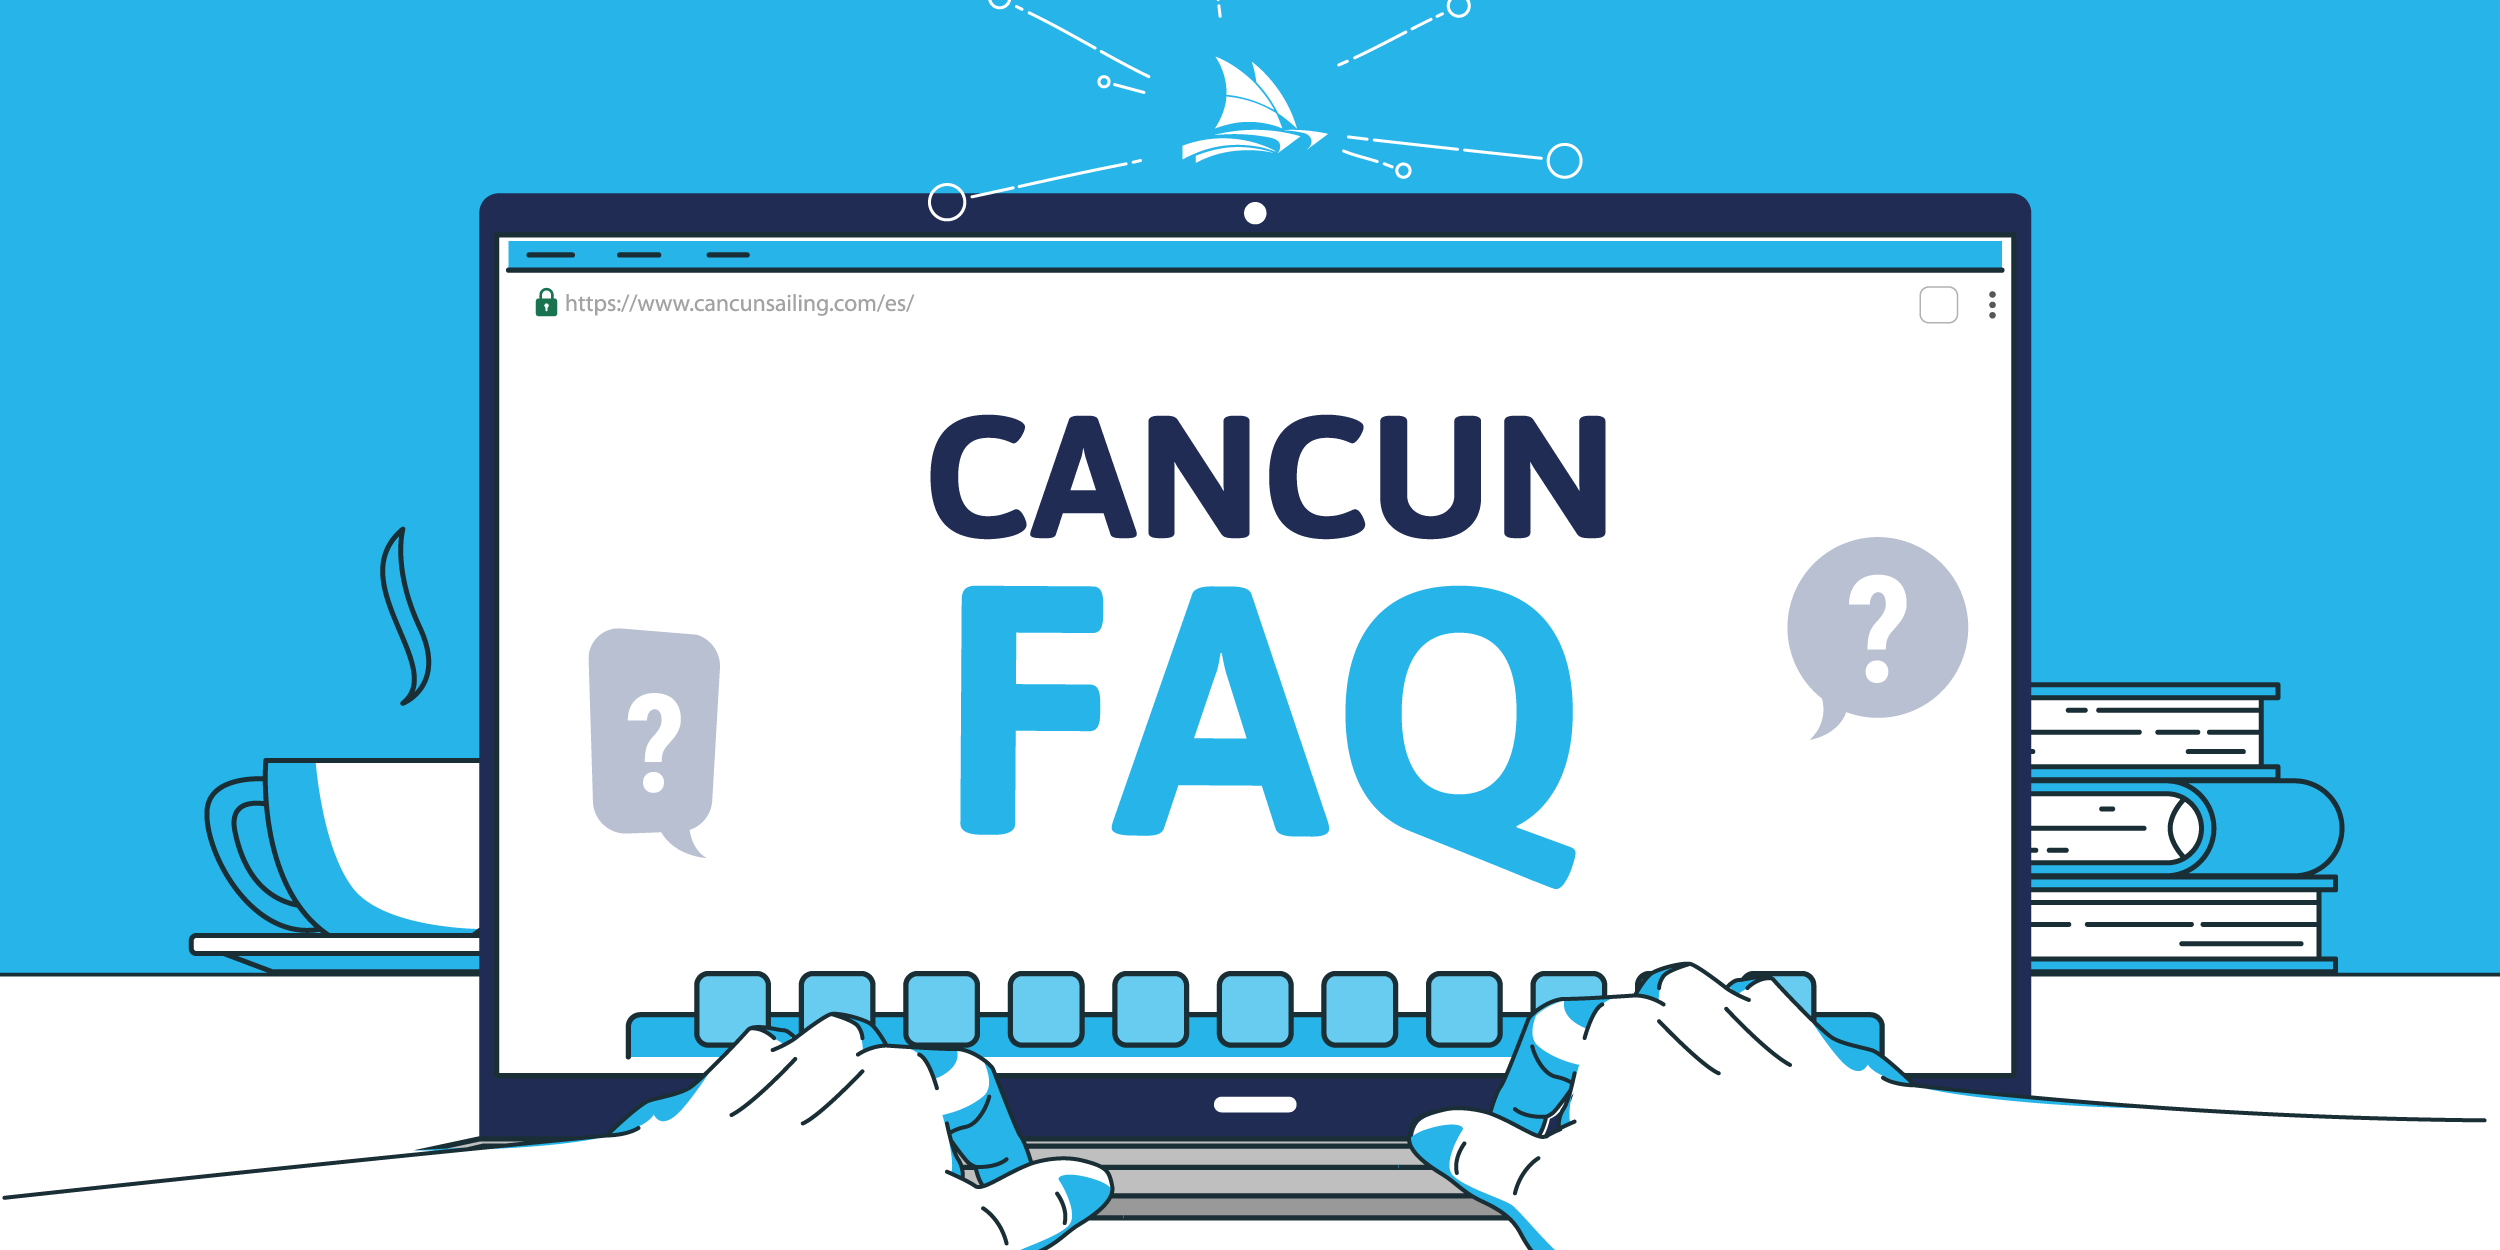 The most common questions about Cancun (and their answers)